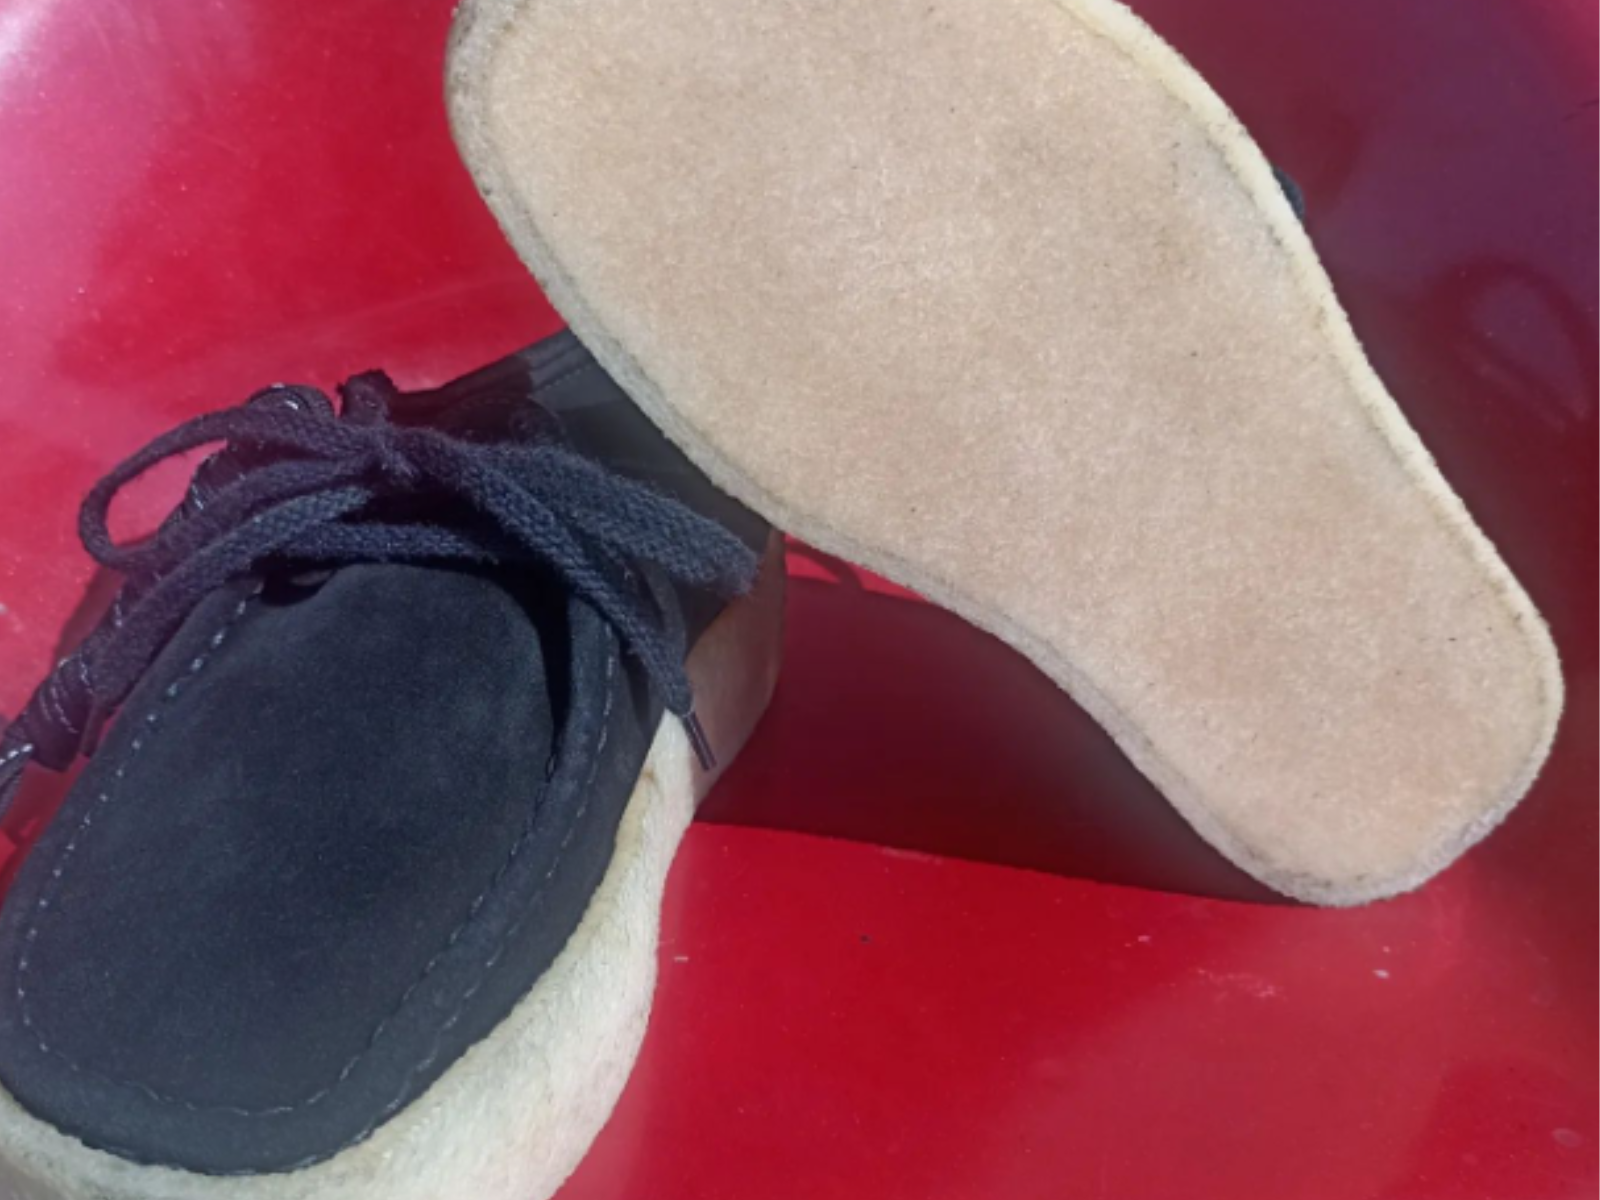 Get Your Clarks Shoes Fully Refurbished At Shoe Genie - Brawta Living